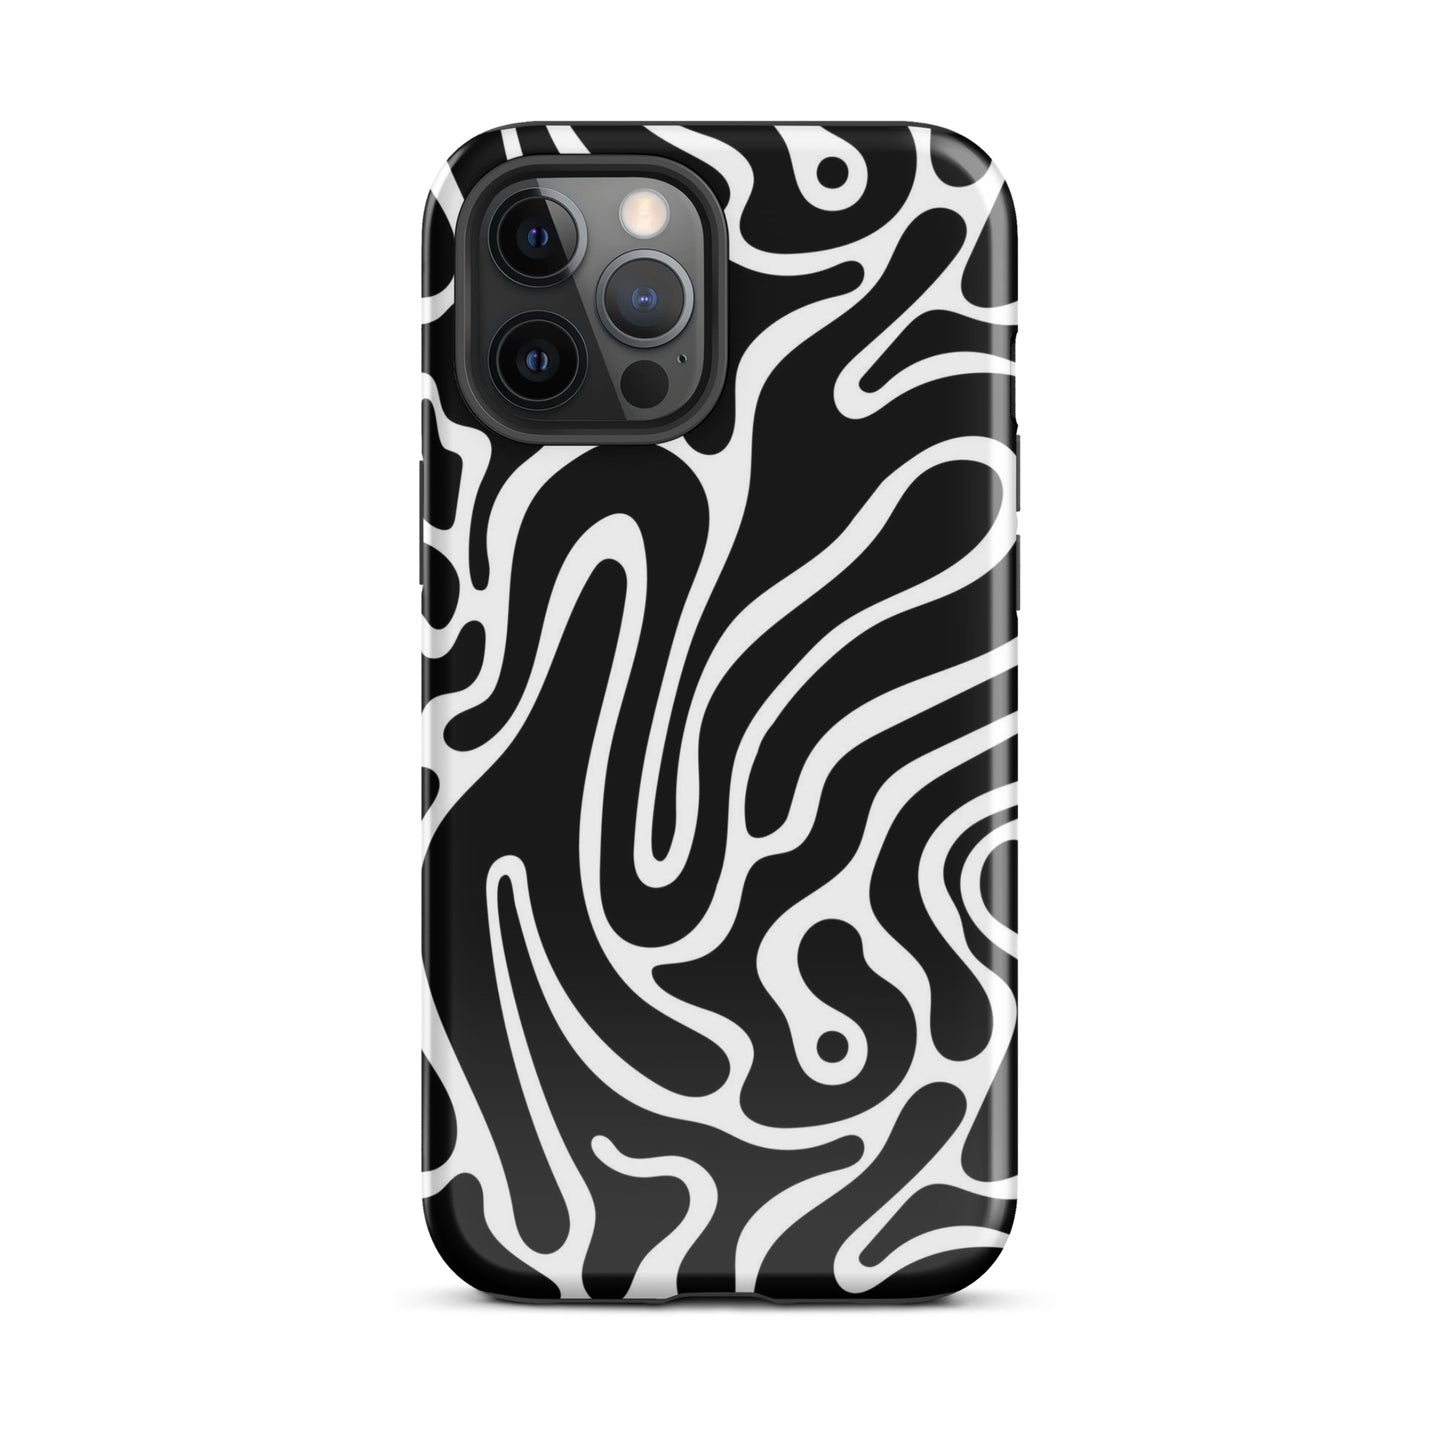 Wavy Noir iPhone Case iPhone 12 Pro Max Glossy